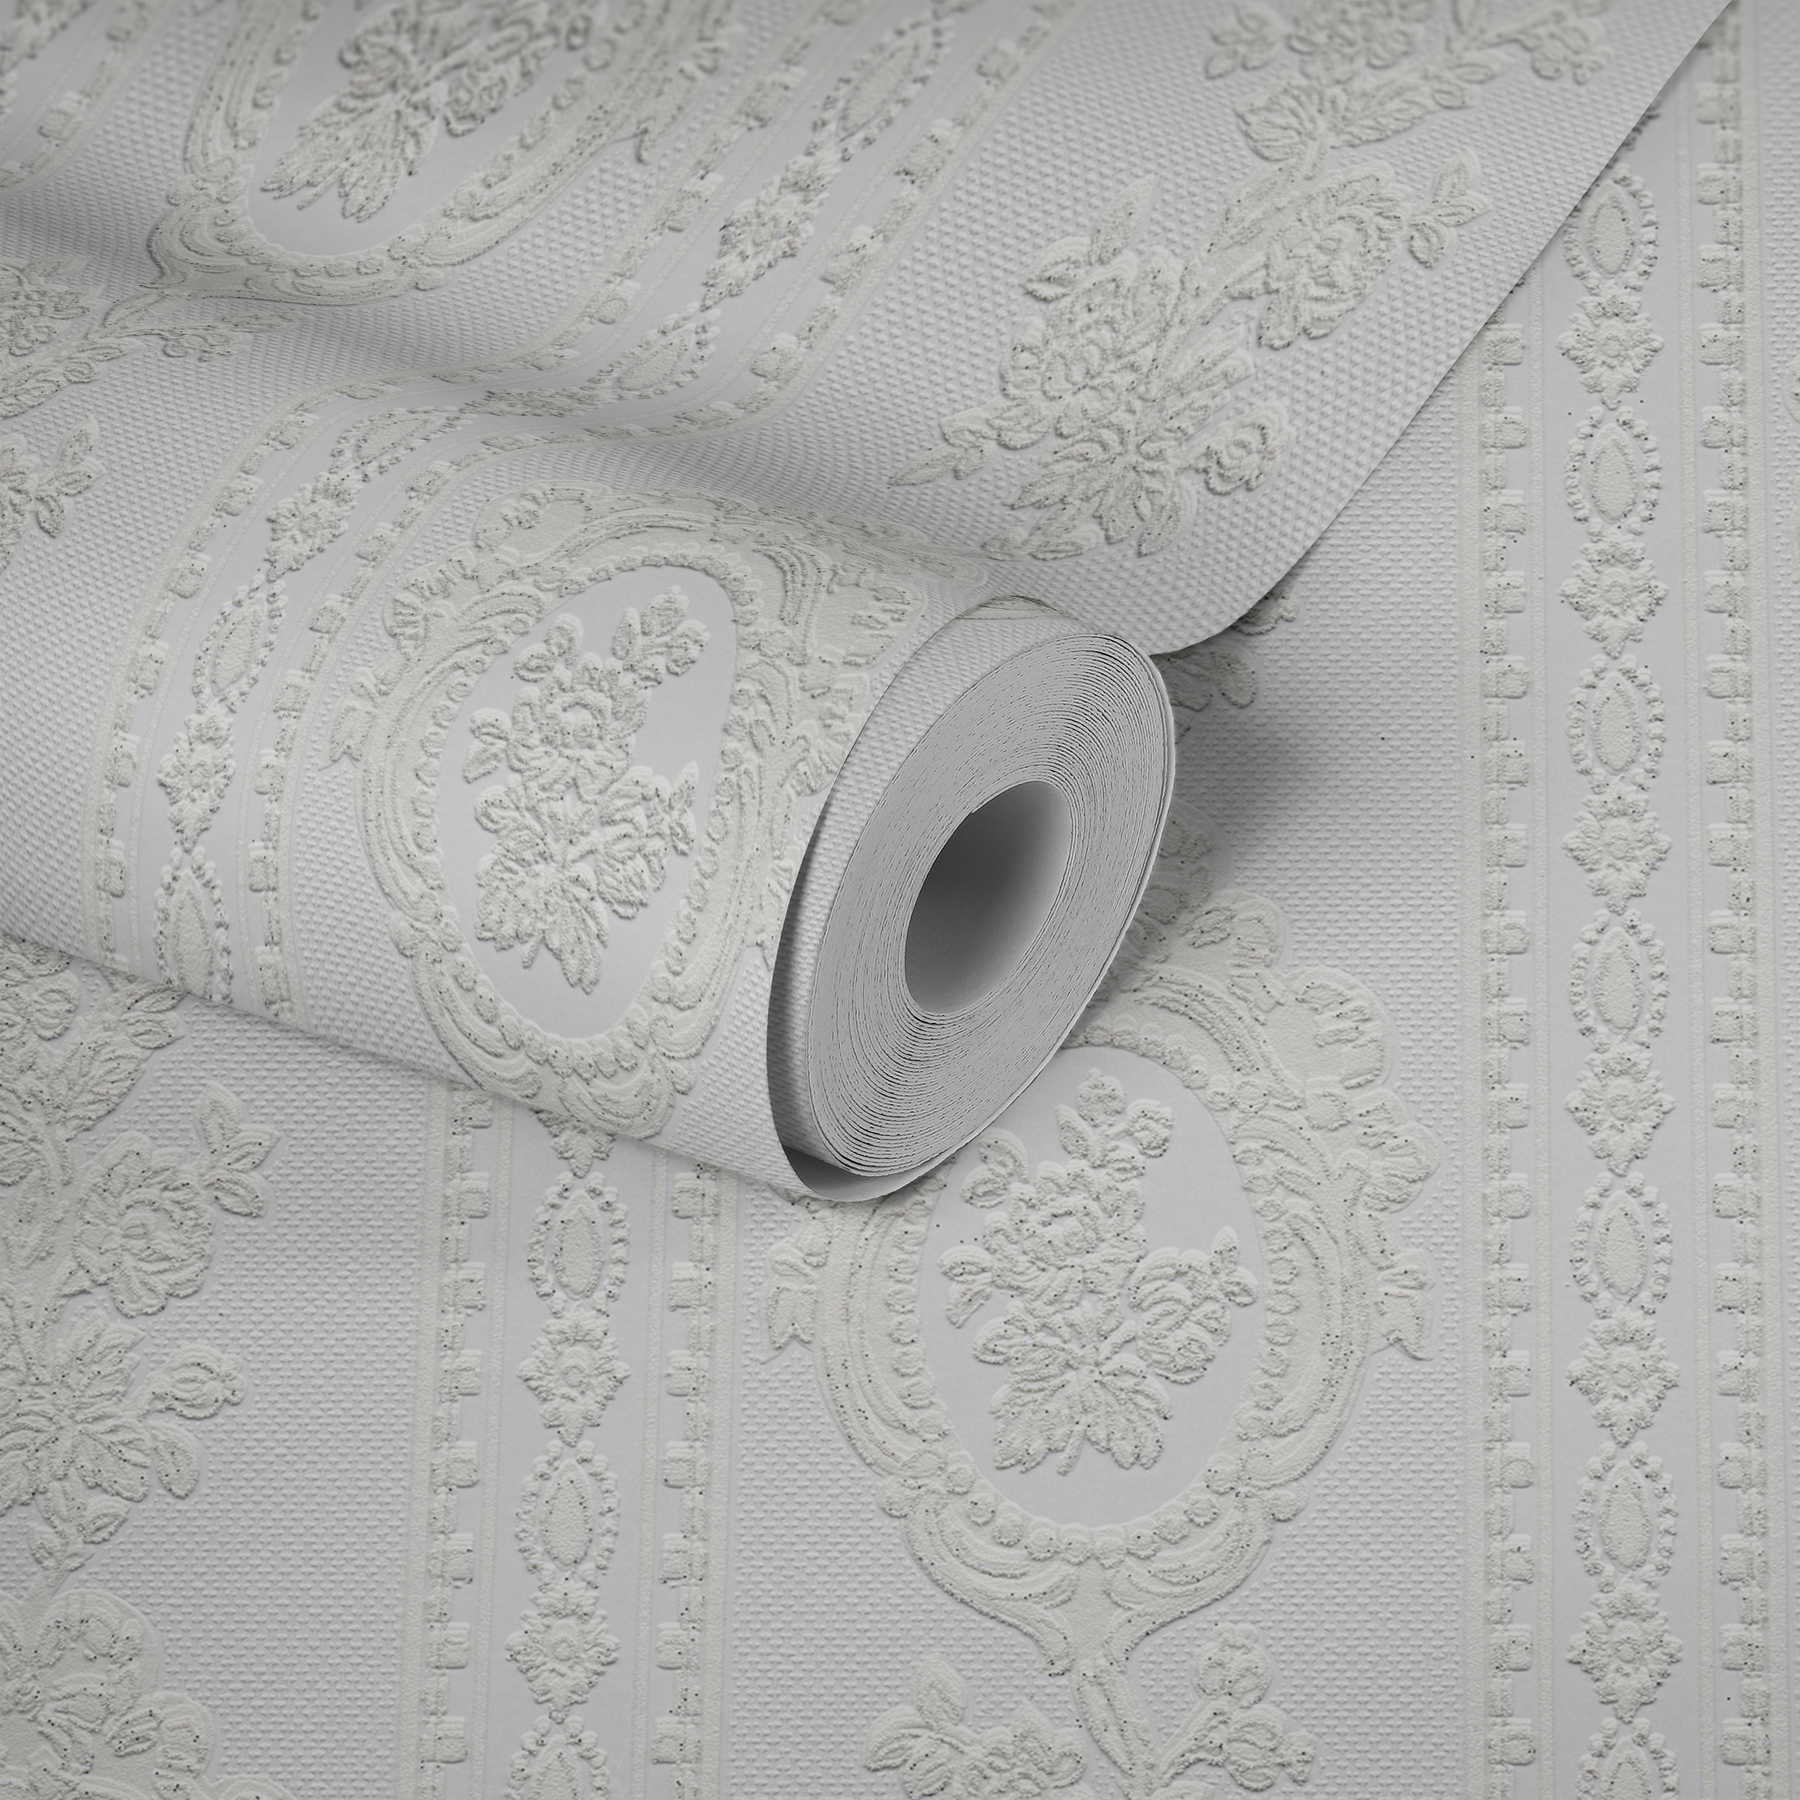             Ornamental wallpaper floral elements, stripes and flowers - white
        